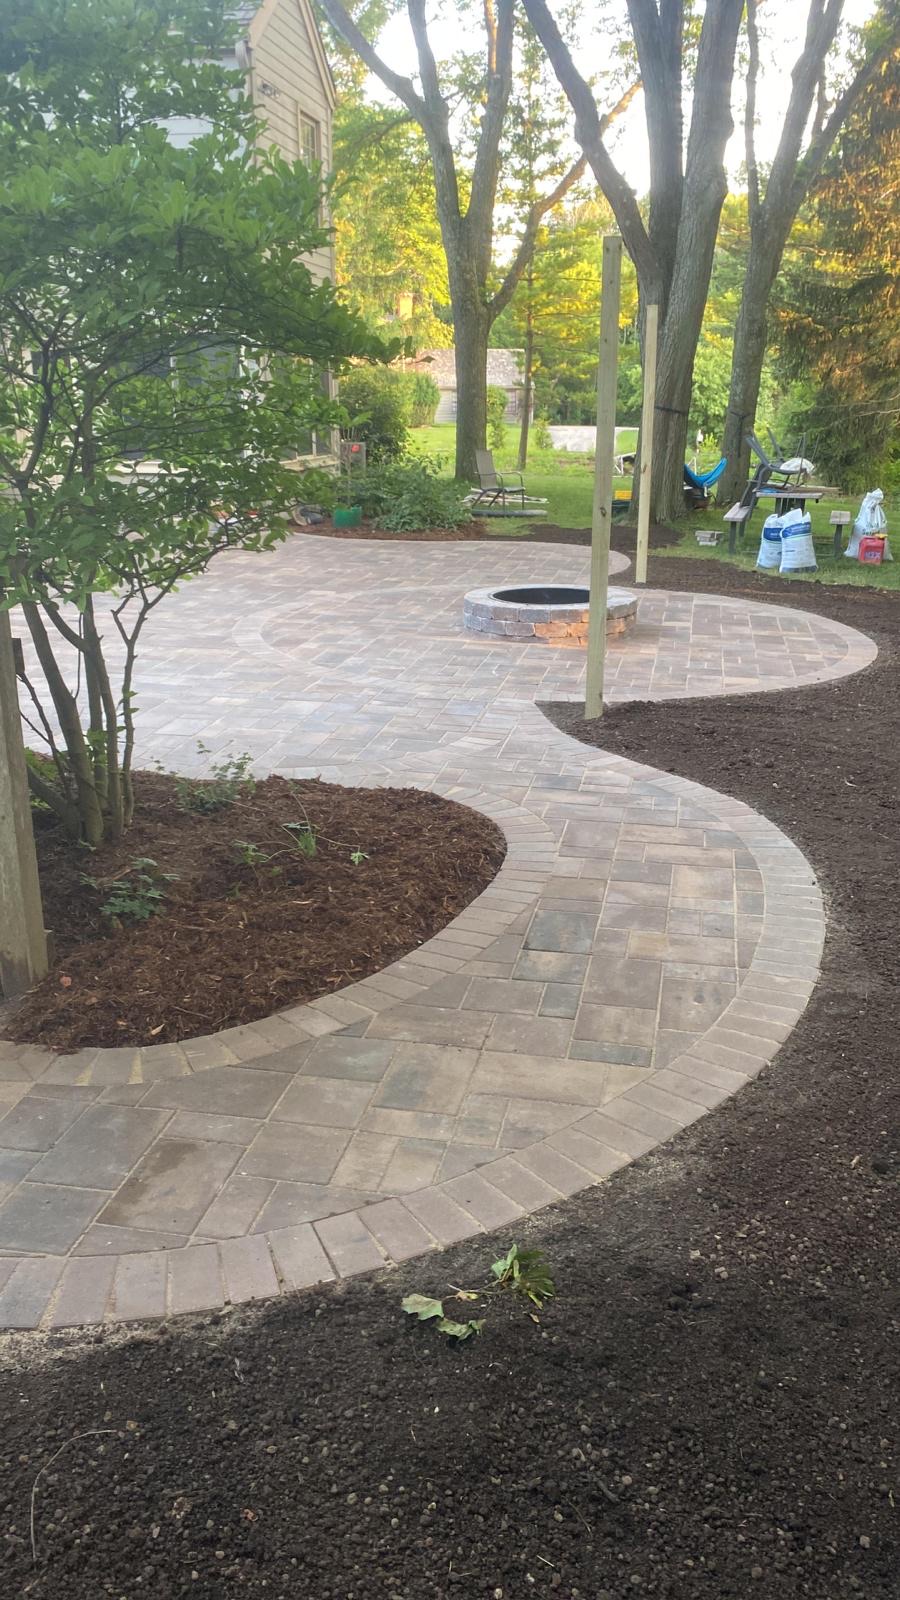 Winding brick path to outdoor patio with a circular fireplace in the back yard surrounded by forest.